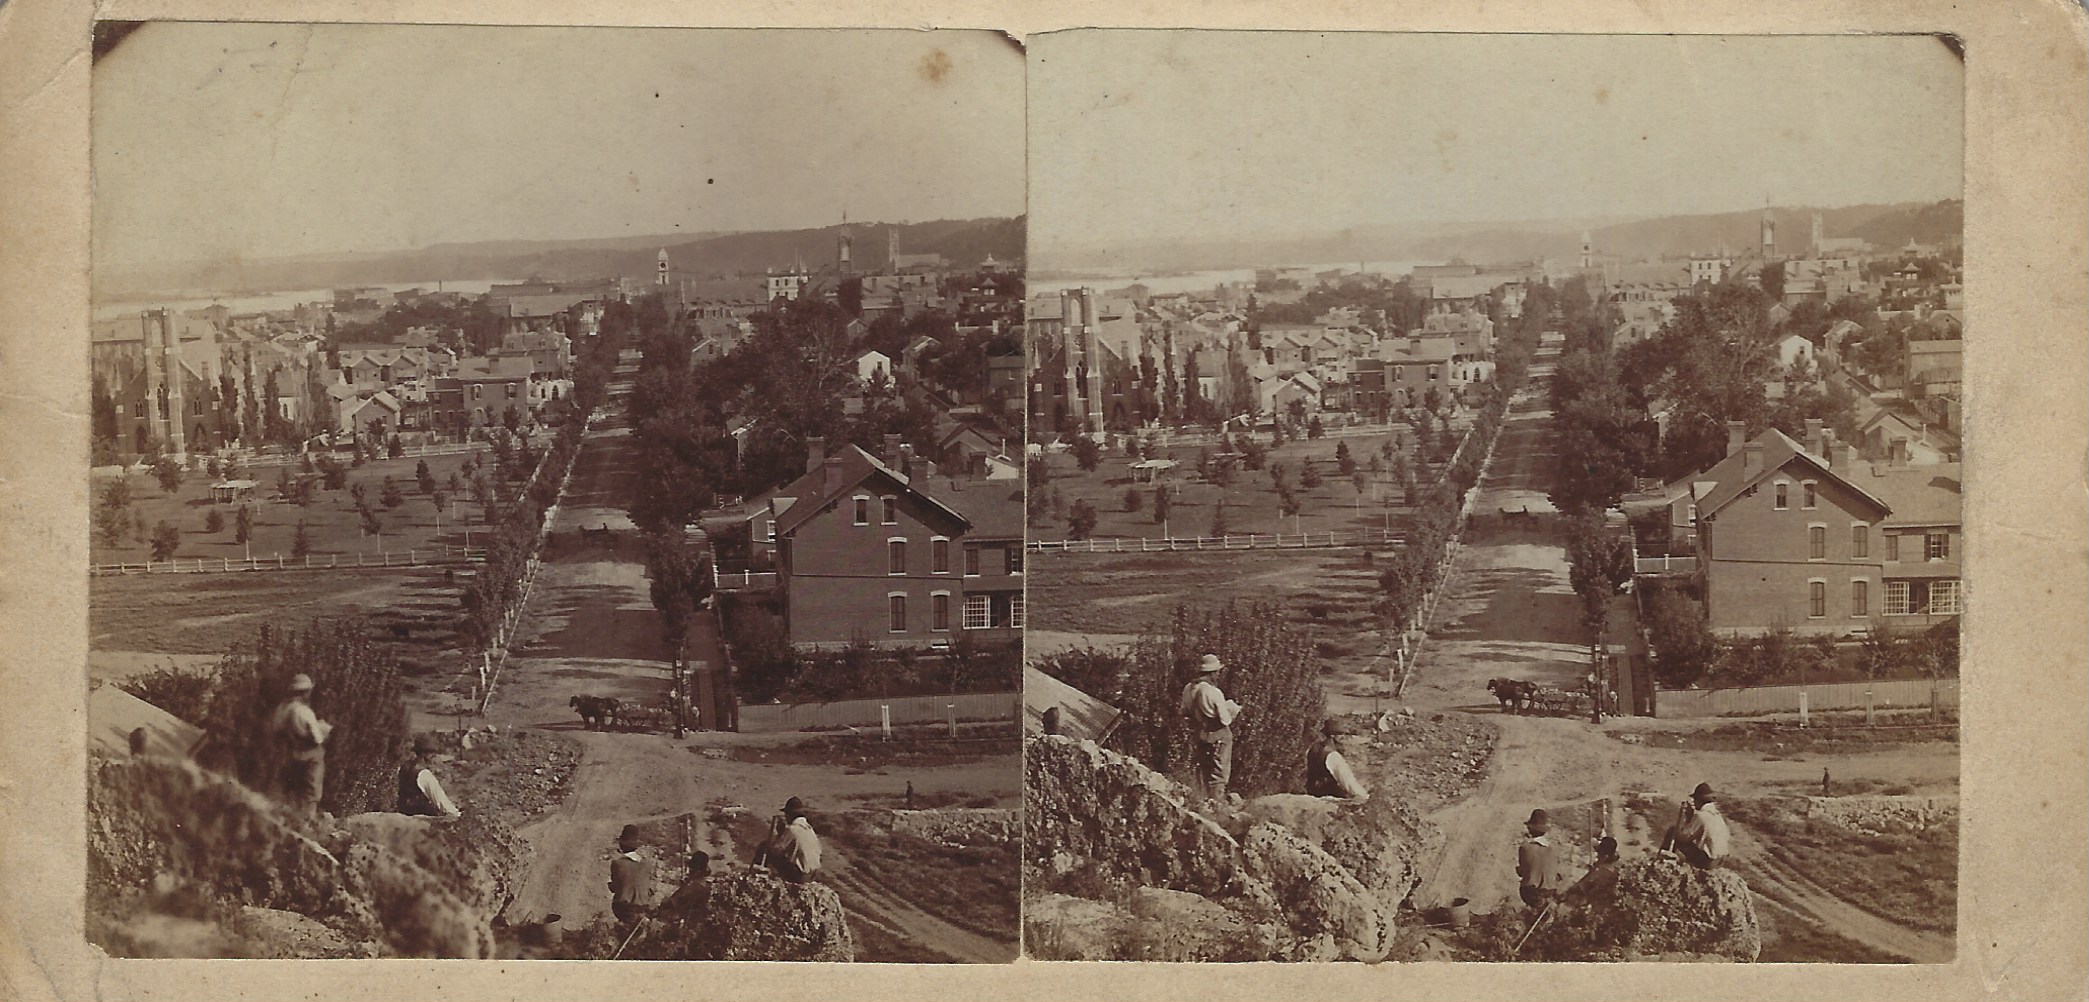 LJTP 100.289 - S. Root - 17th & Main St from Seminary Hill - c1875